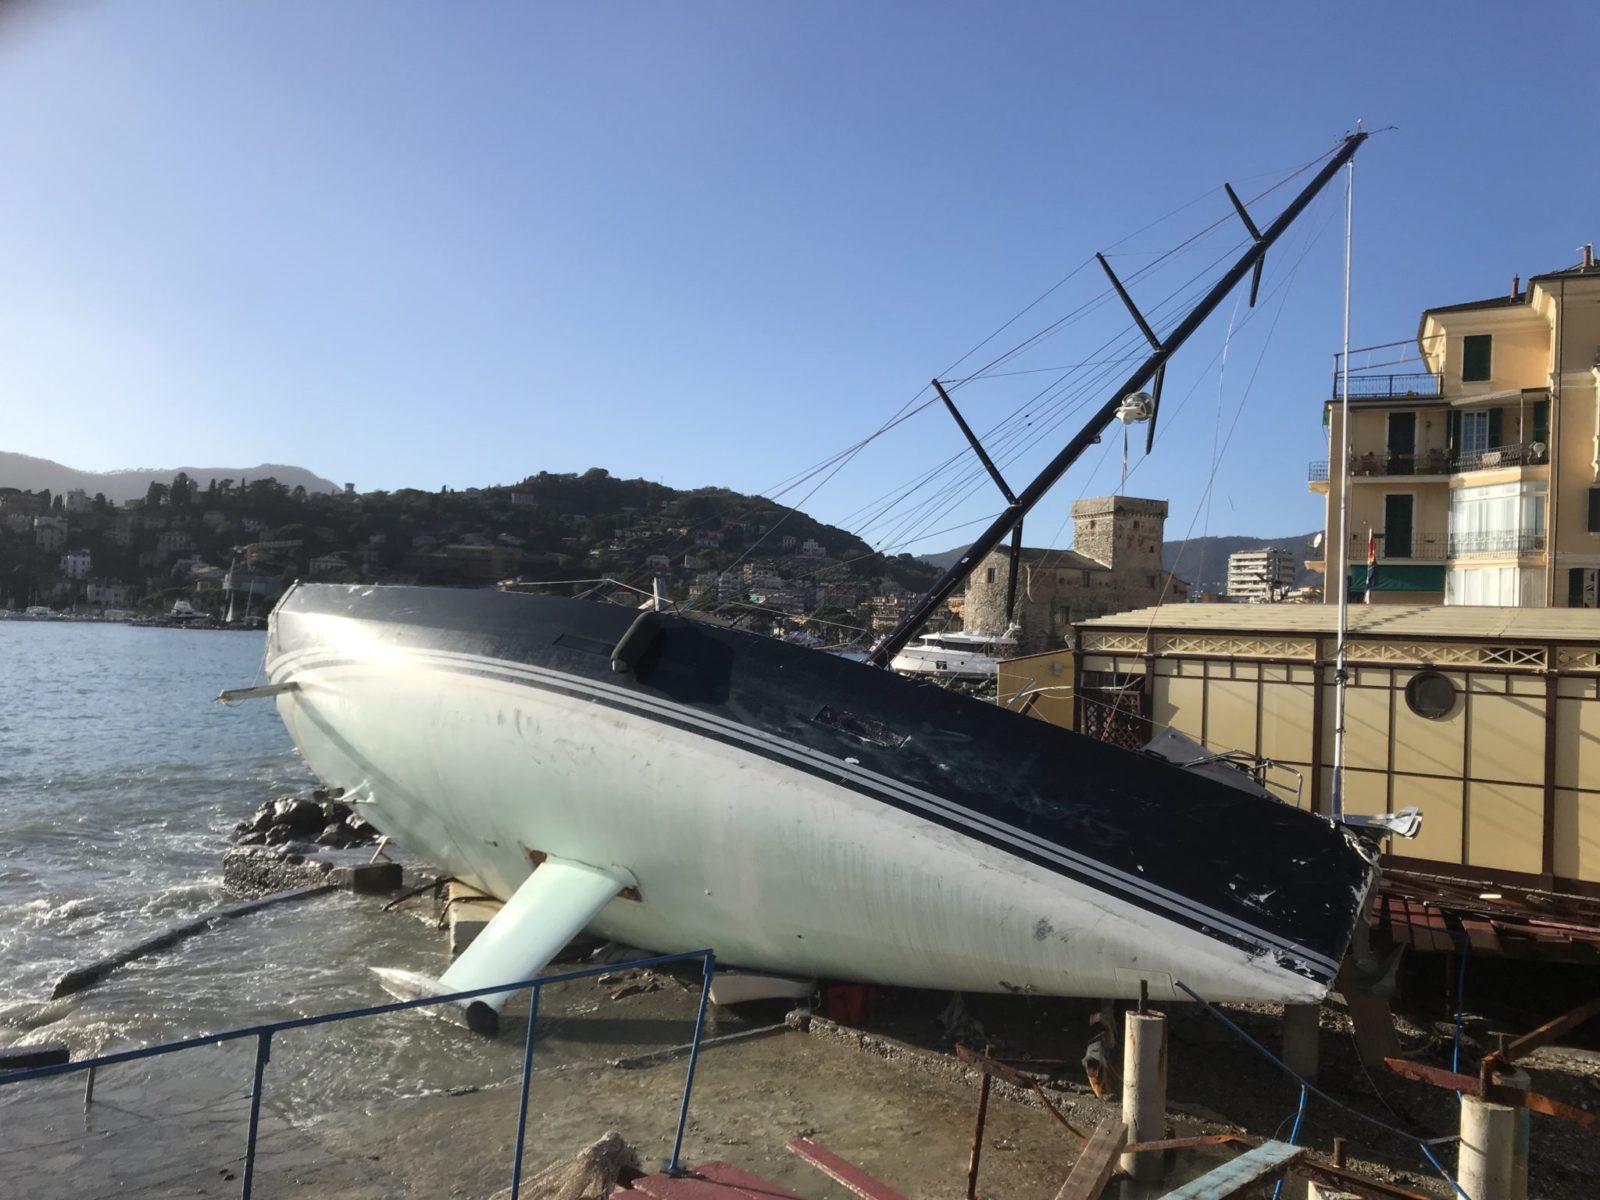 After a month from the sea storm in Rapallo, Italy …